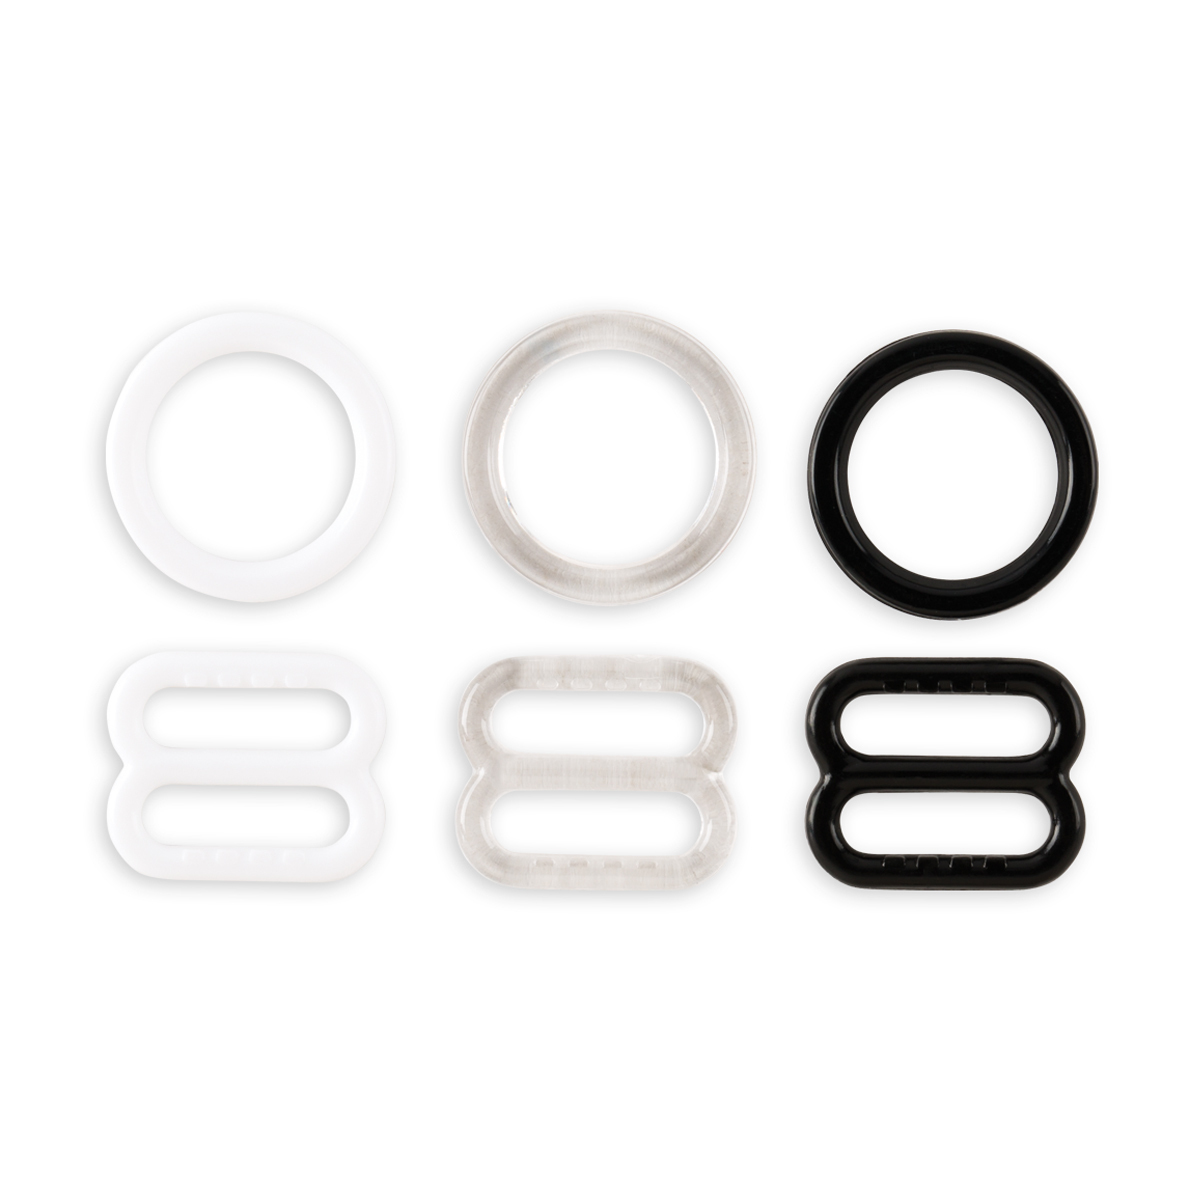 Lingerie Strap Slides & Rings - 3 Pairs/Pack - Black, Clear, White - WAWAK  Sewing Supplies